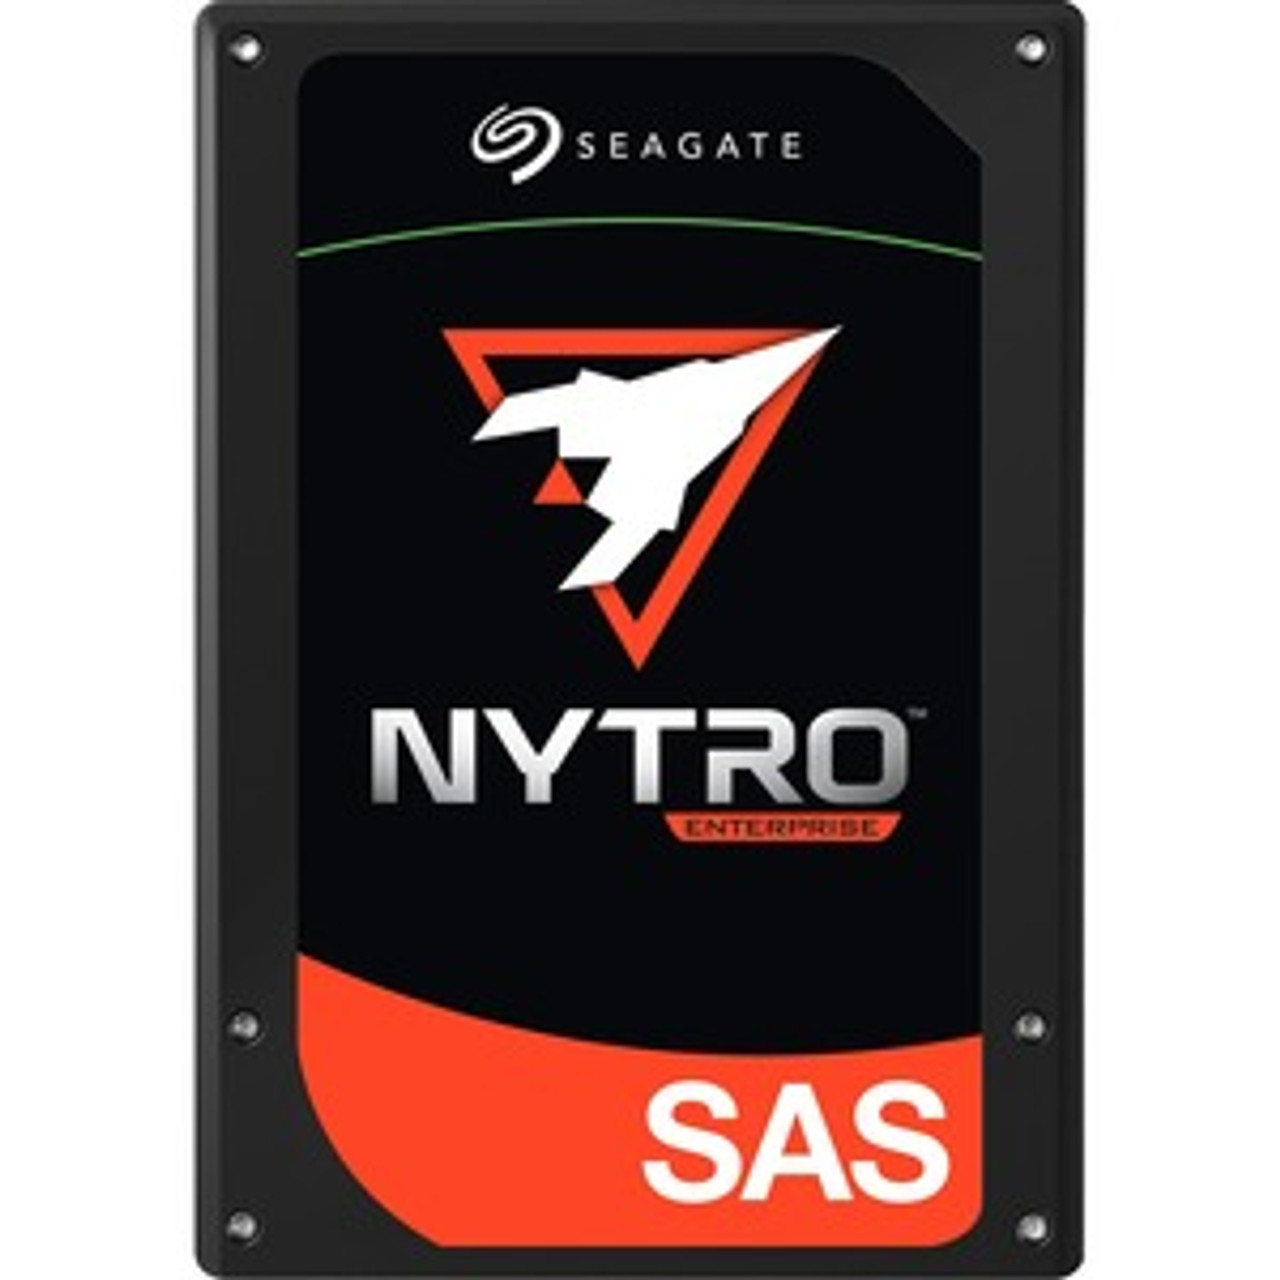 XS1920SE10103-5PK Seagate Nytro 3330 1.92TB eTLC SAS 12Gbps Scaled Endurance 2.5-inch Internal Solid State Drive (SSD) (5-Pack)